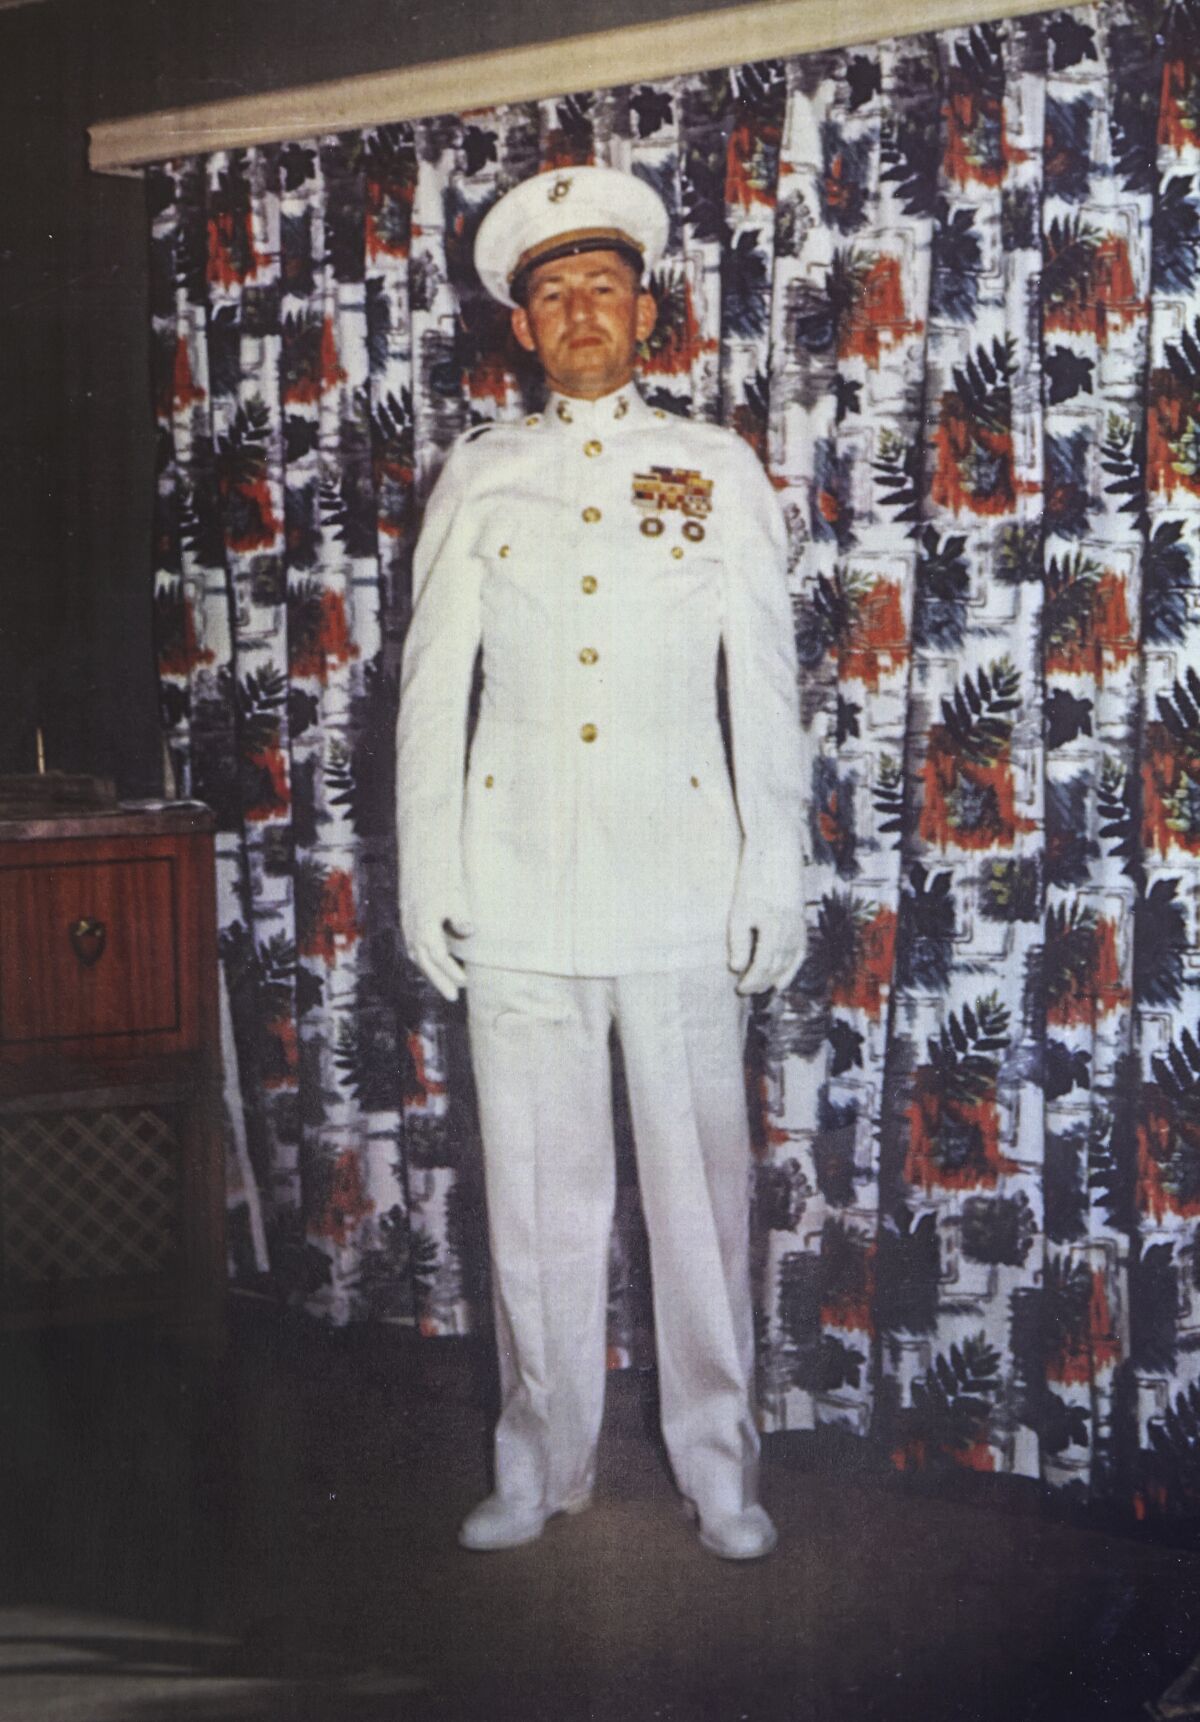 A photo of Louis Duncan in uniform during the mid-1950s, taken at his home in Vista.  